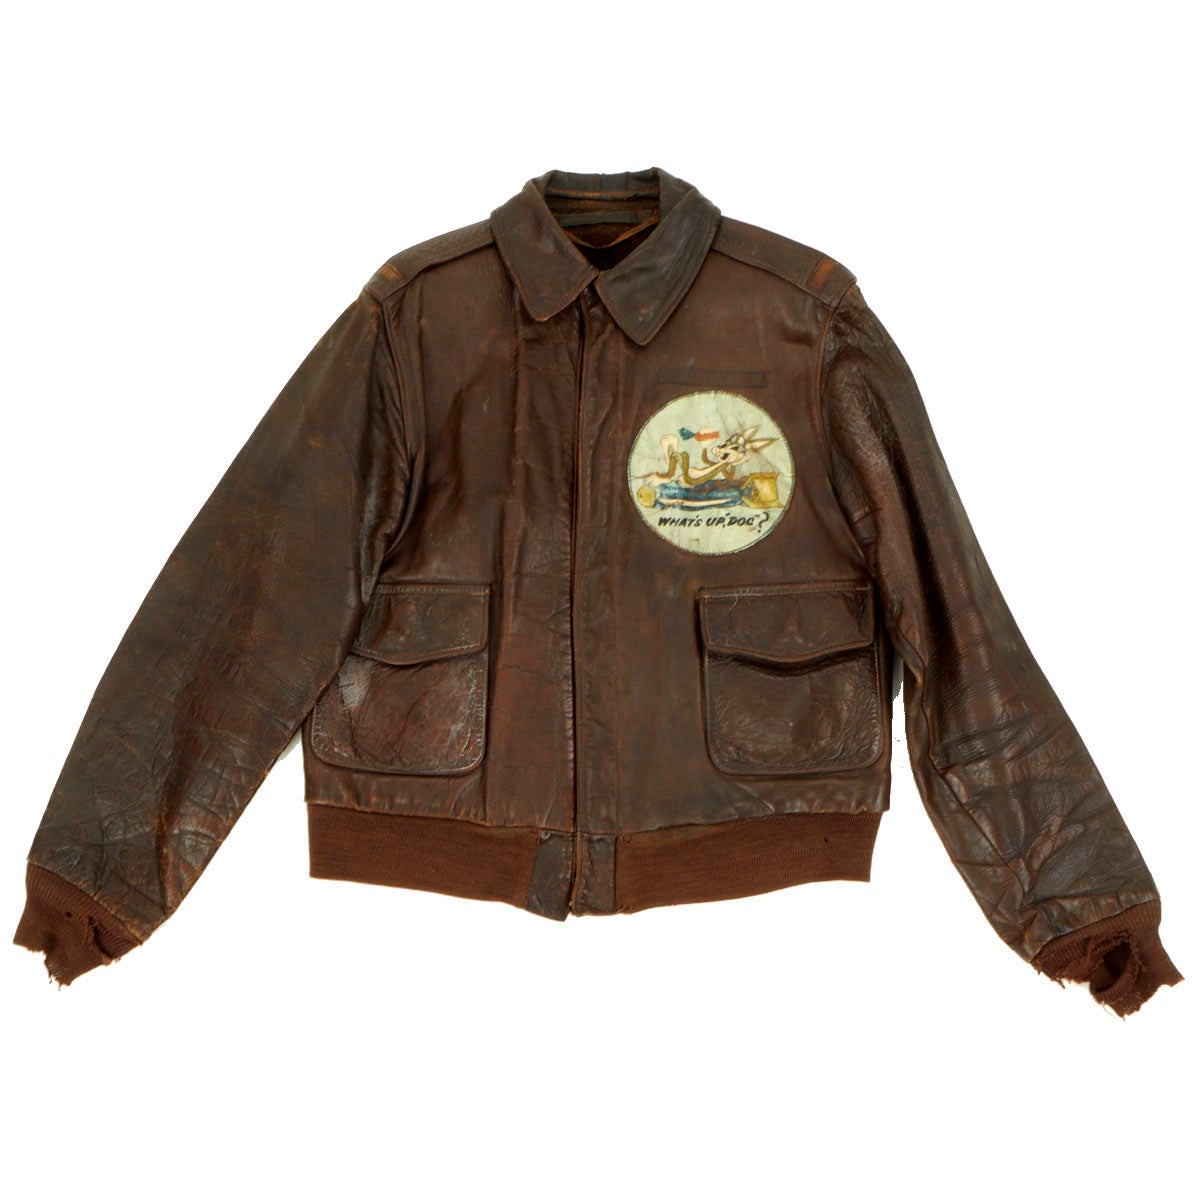 Authentic A2 Leather Flight Jackets